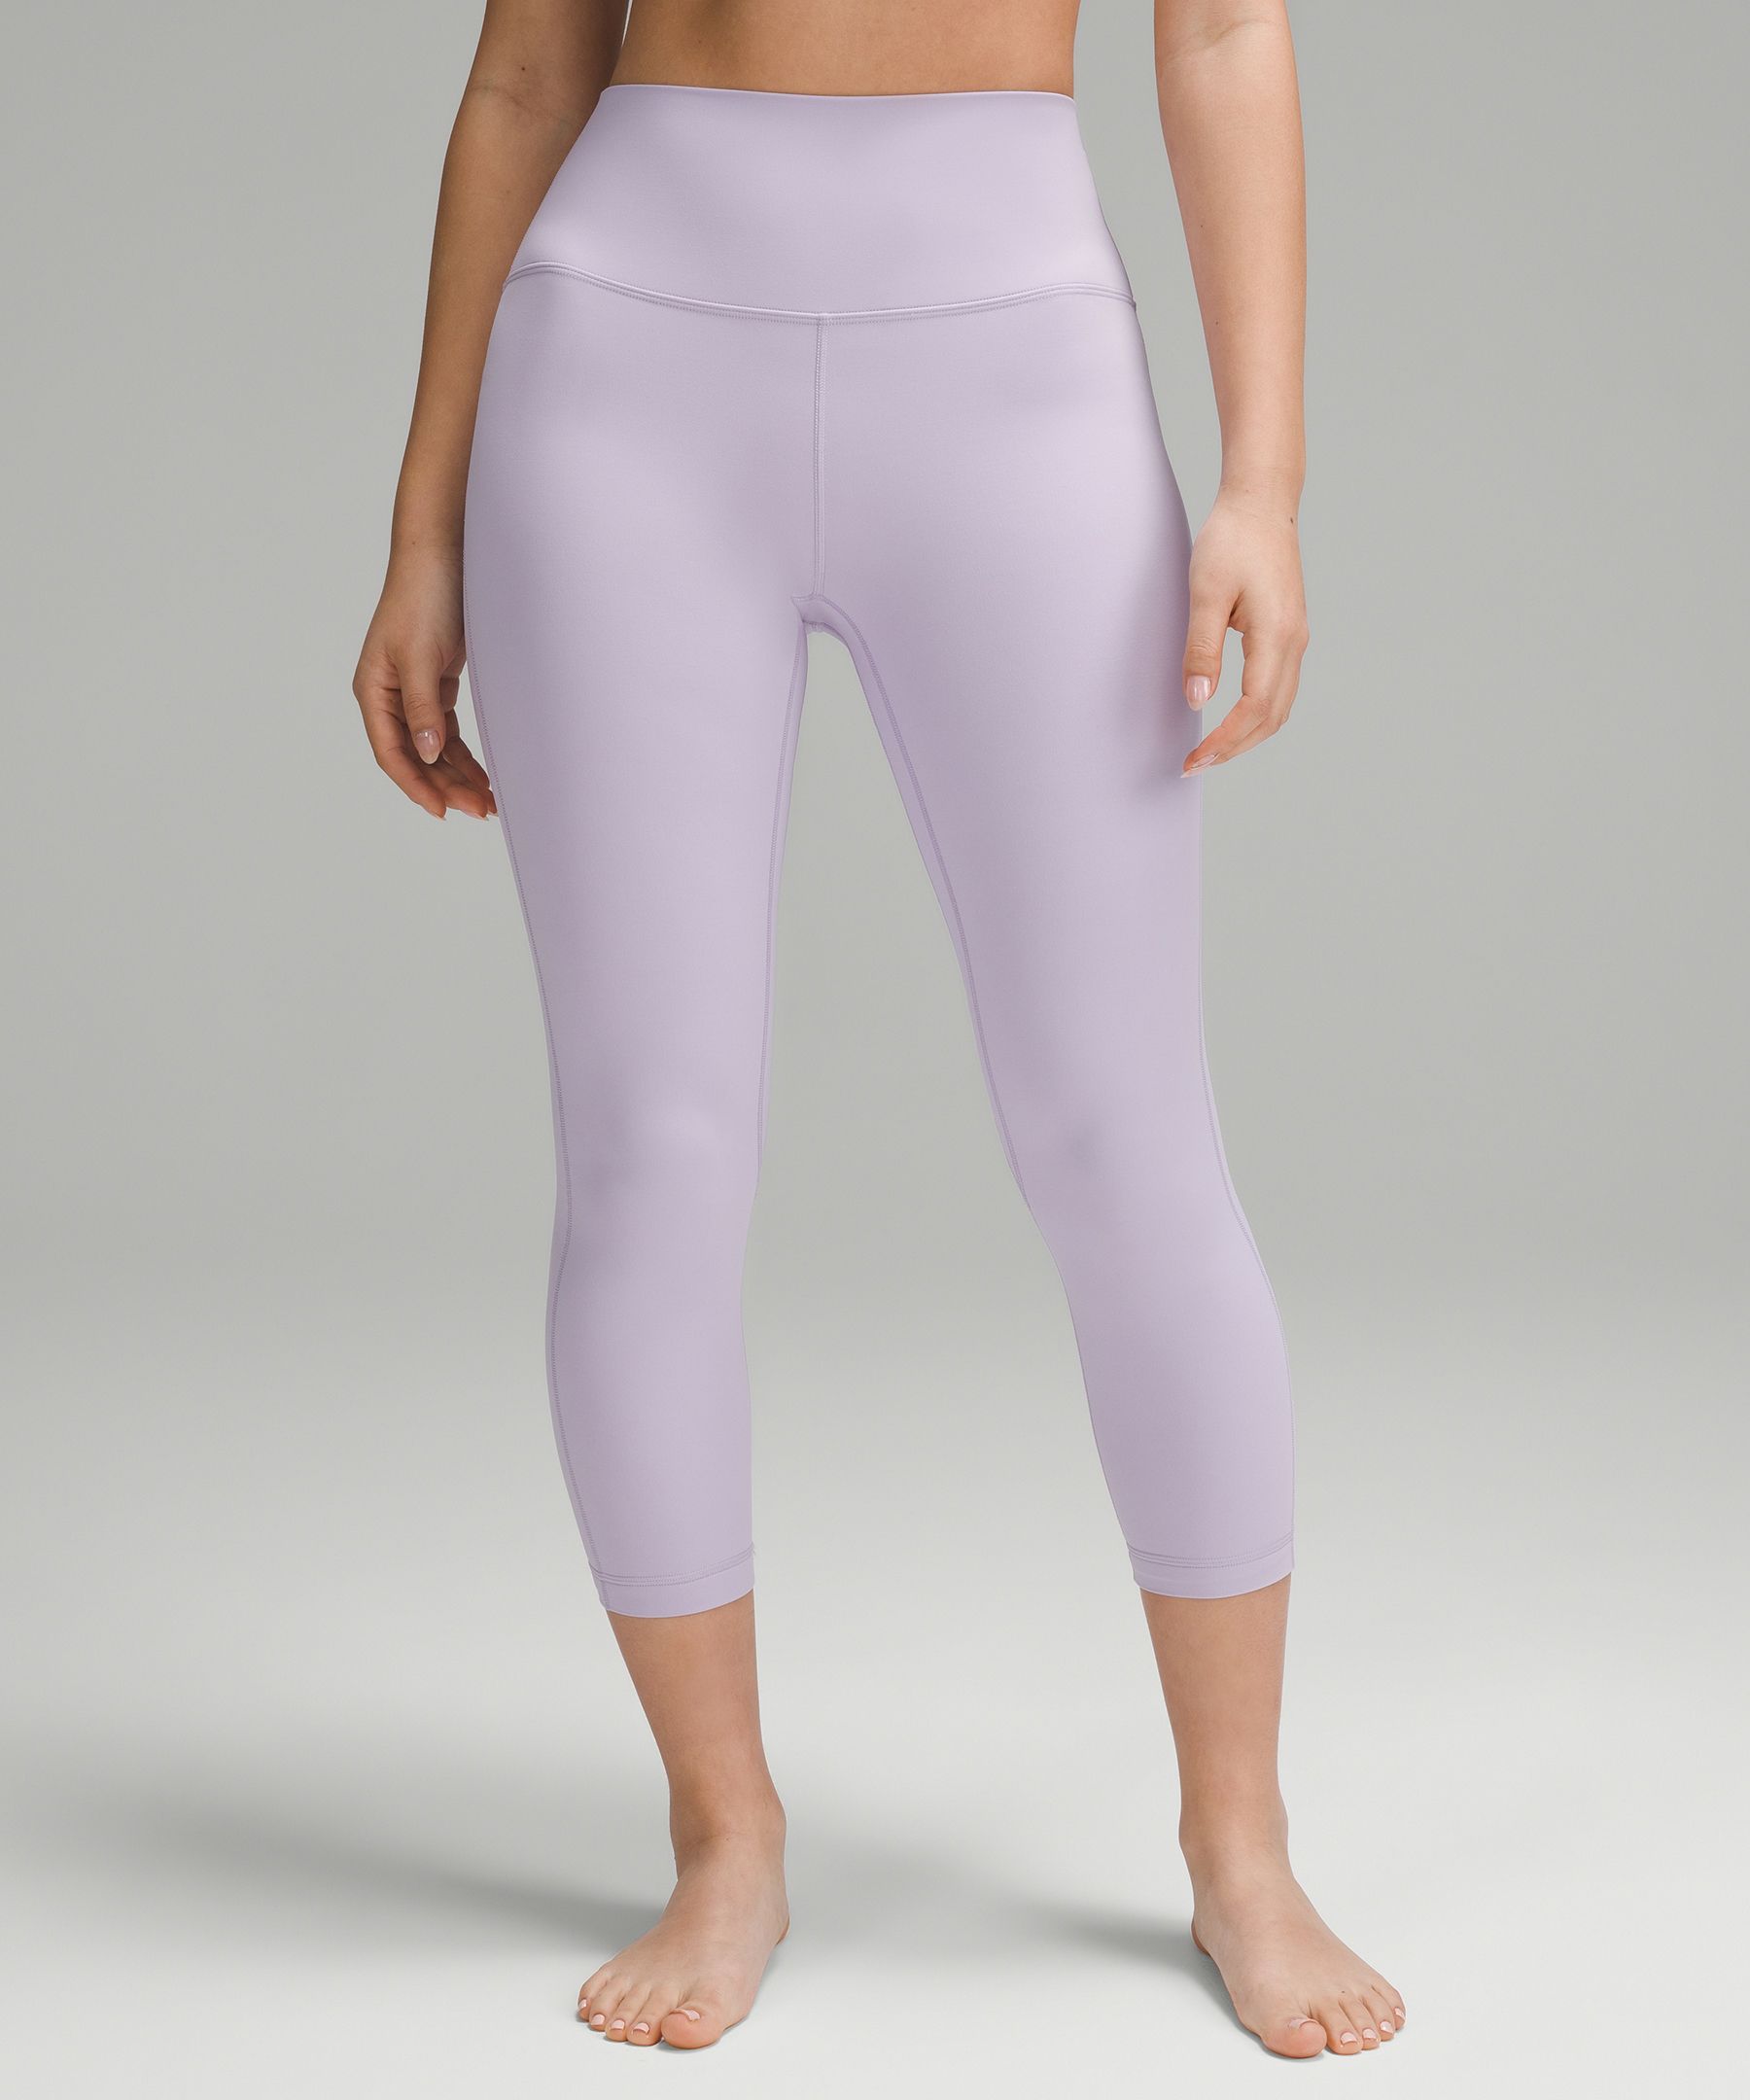 Sage Collective Crop Leggings 23” Inseam in Lilac (M)